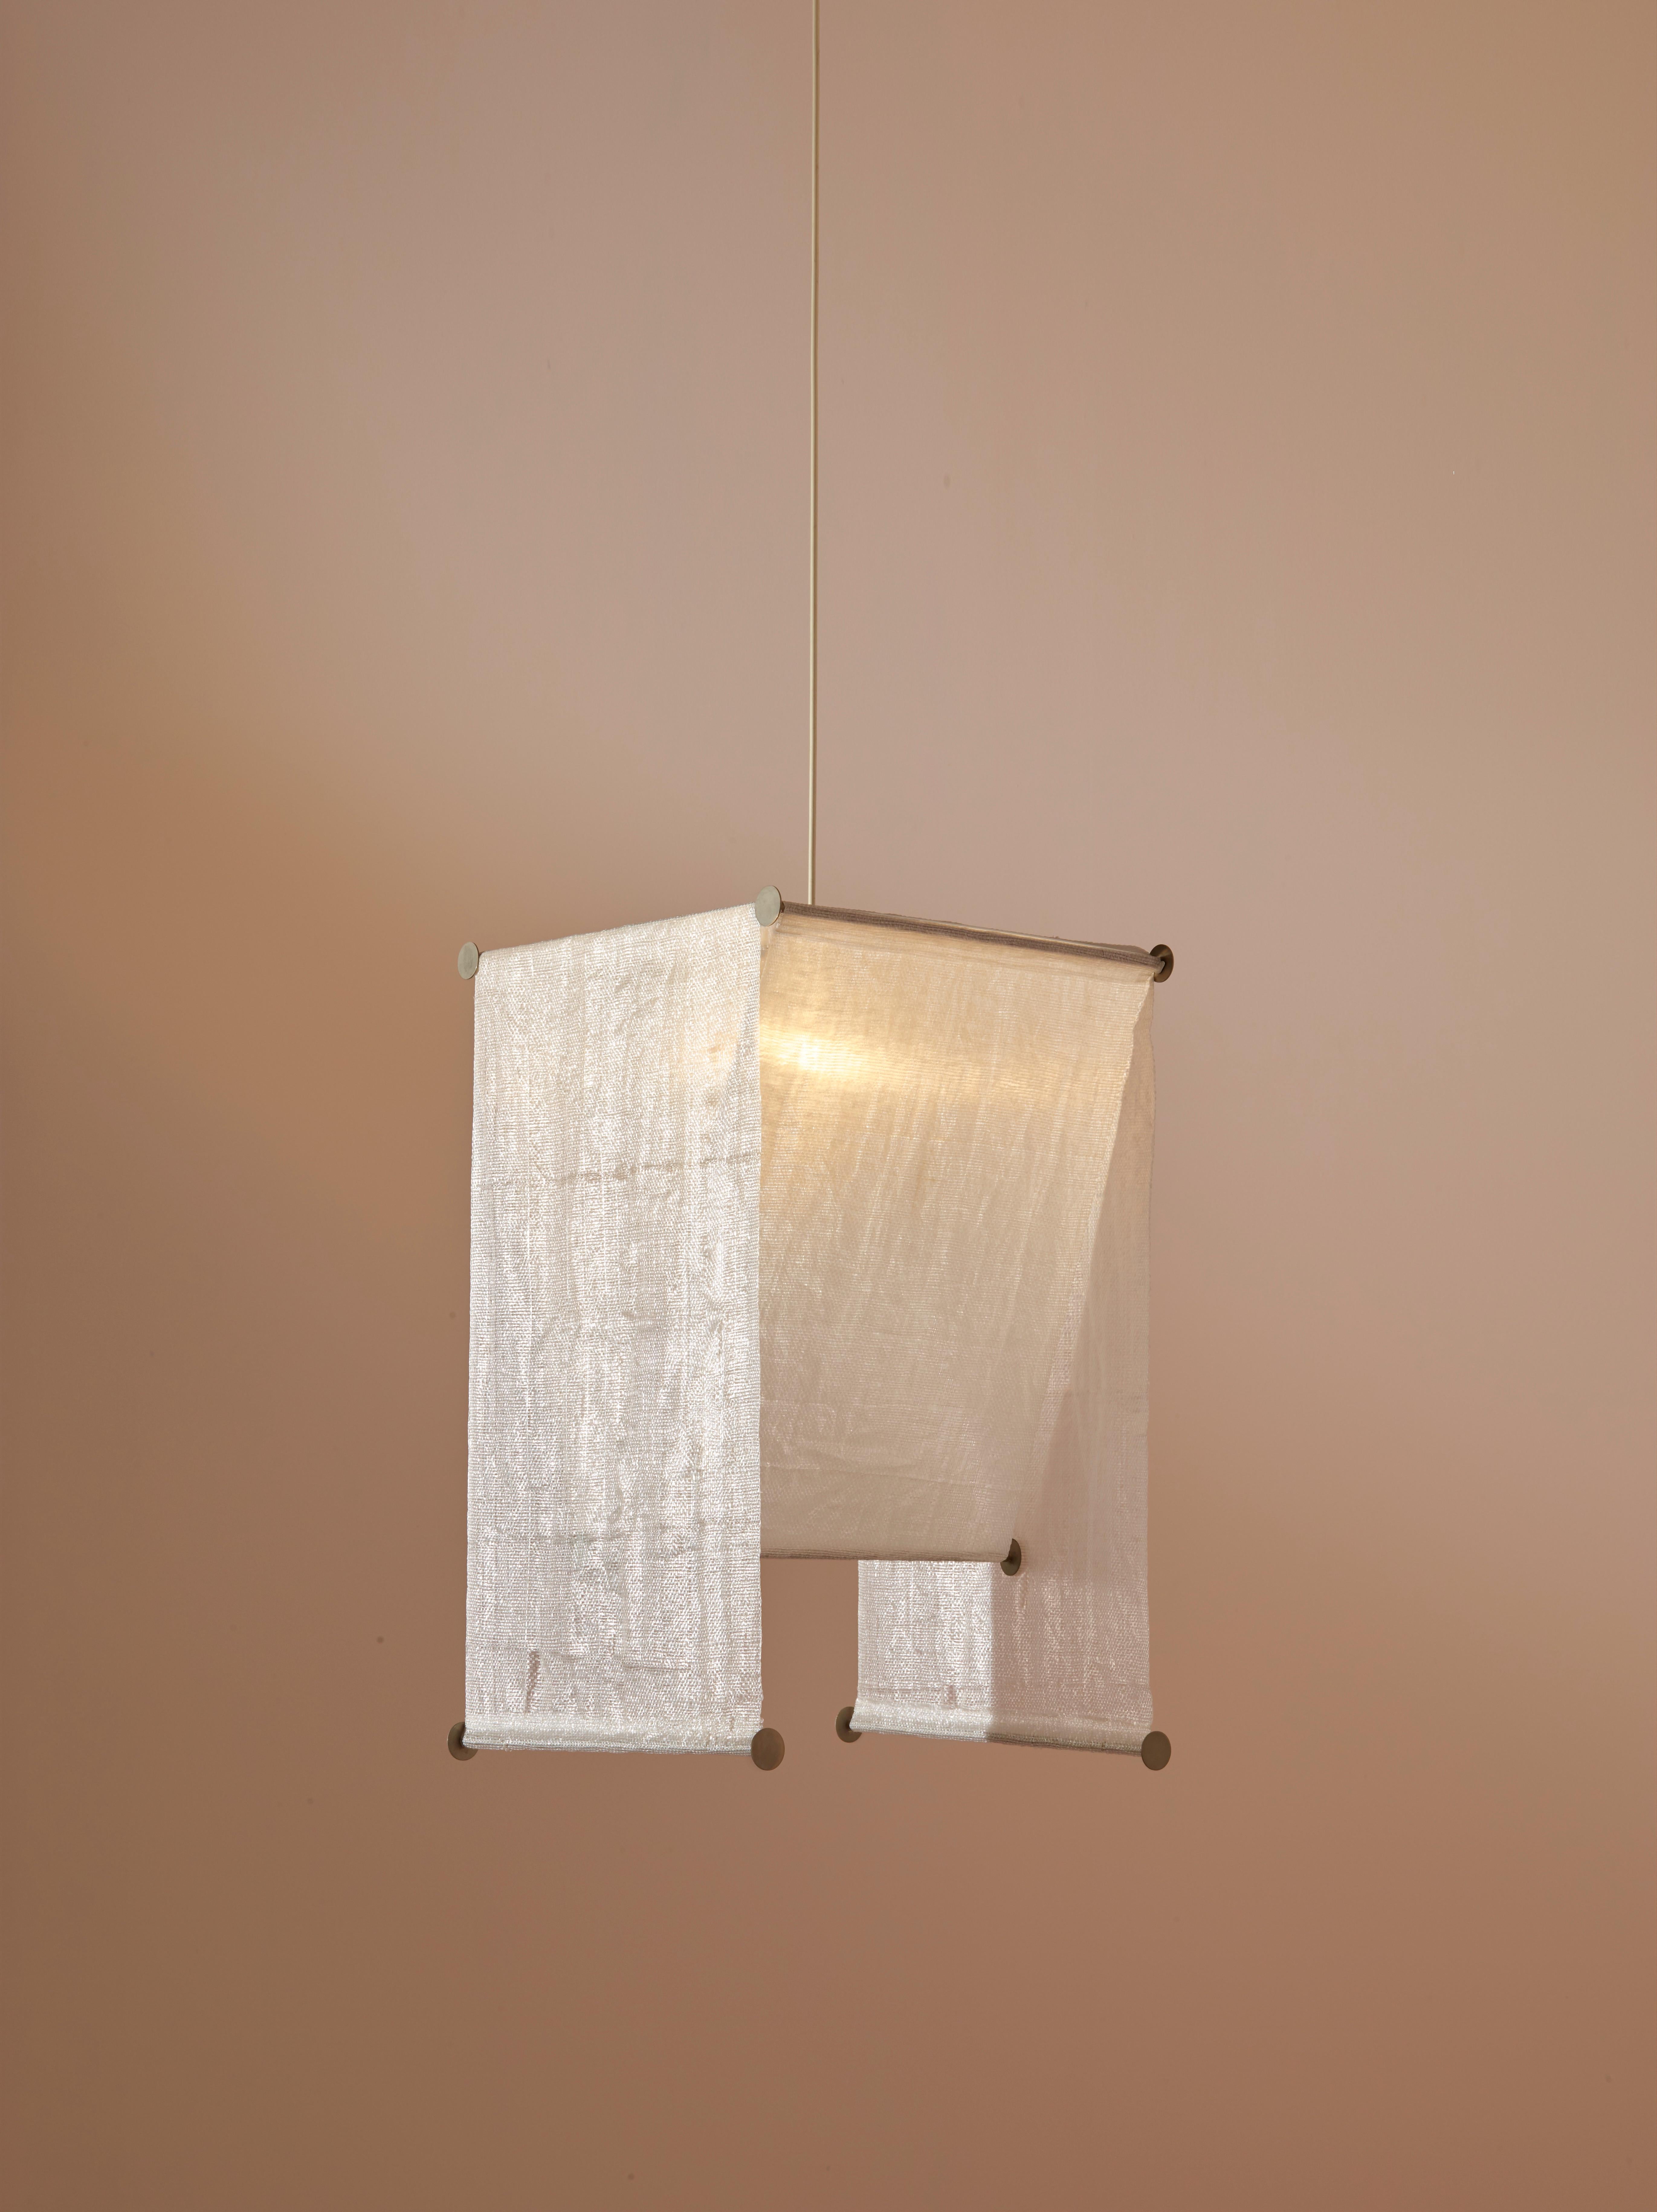 Aluminum Teli KD51/R Hanging Lamp by Achille and Pier Giacomo Castiglioni for Flos, 1973